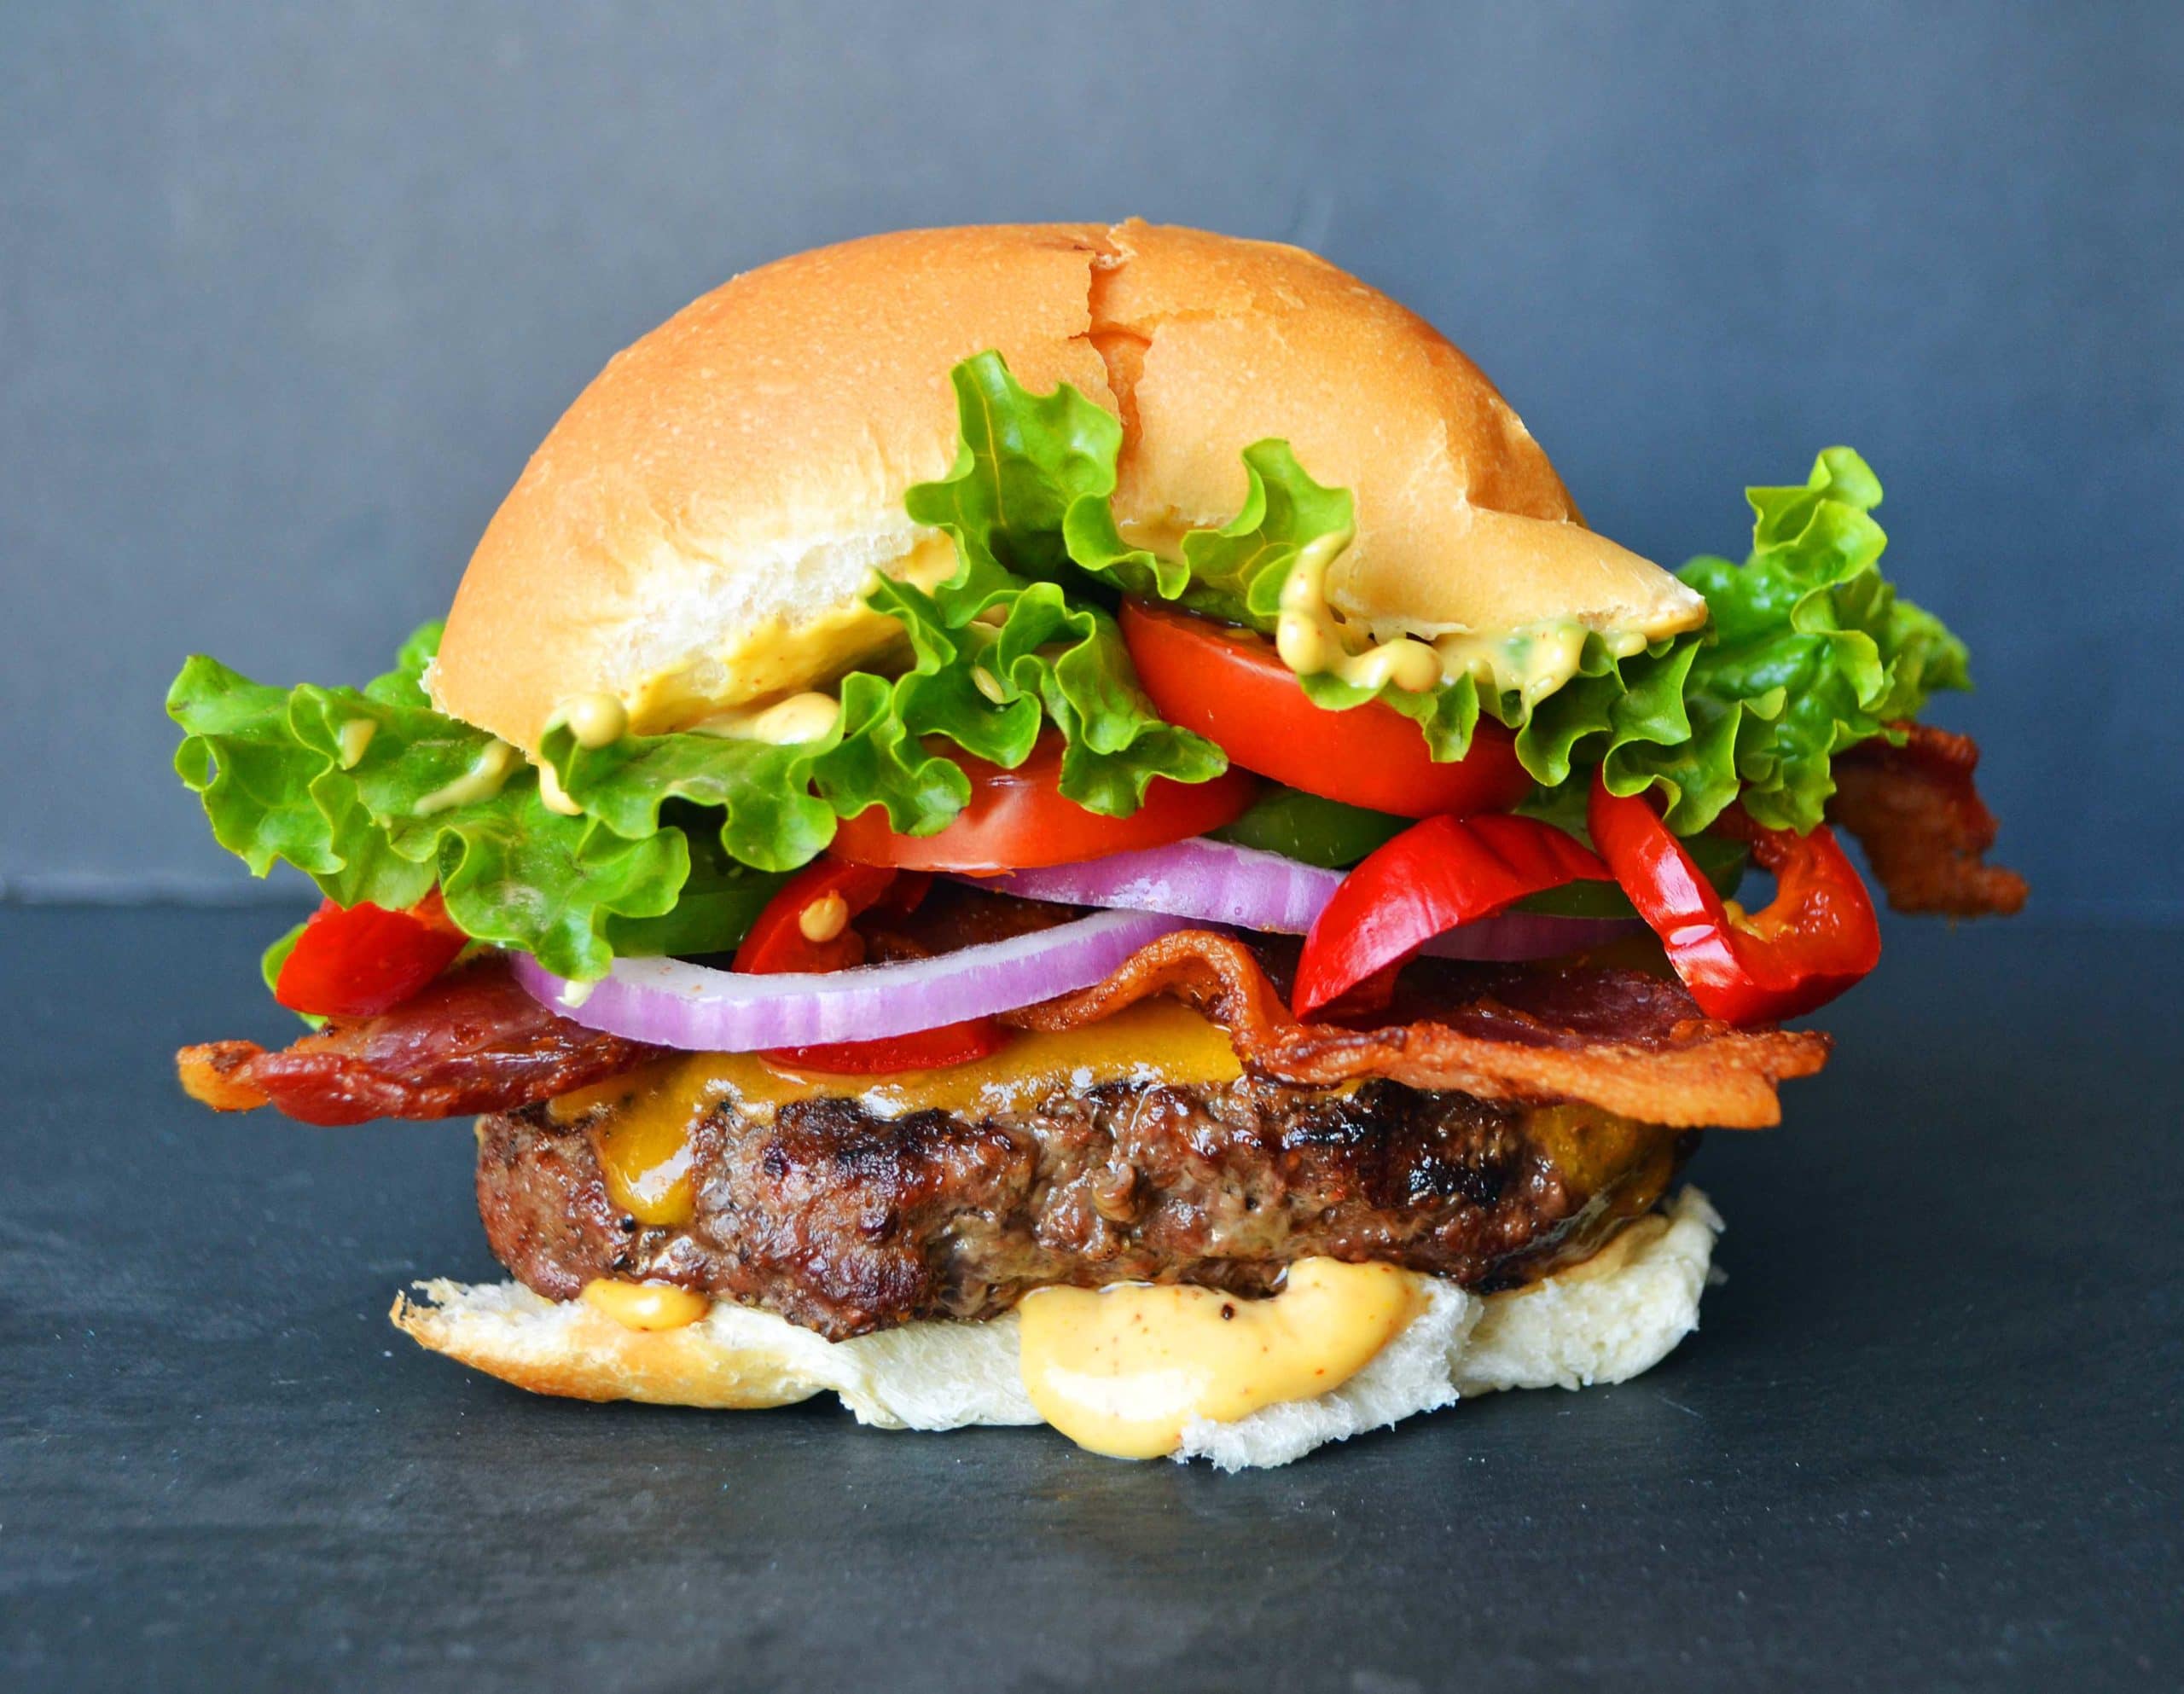 The Ultimate Burger. Tips and tricks for grilling up the perfect burger. How to make the best burger. How to grill a burger. Grilling a burger tips. #grilling #burger #burgers